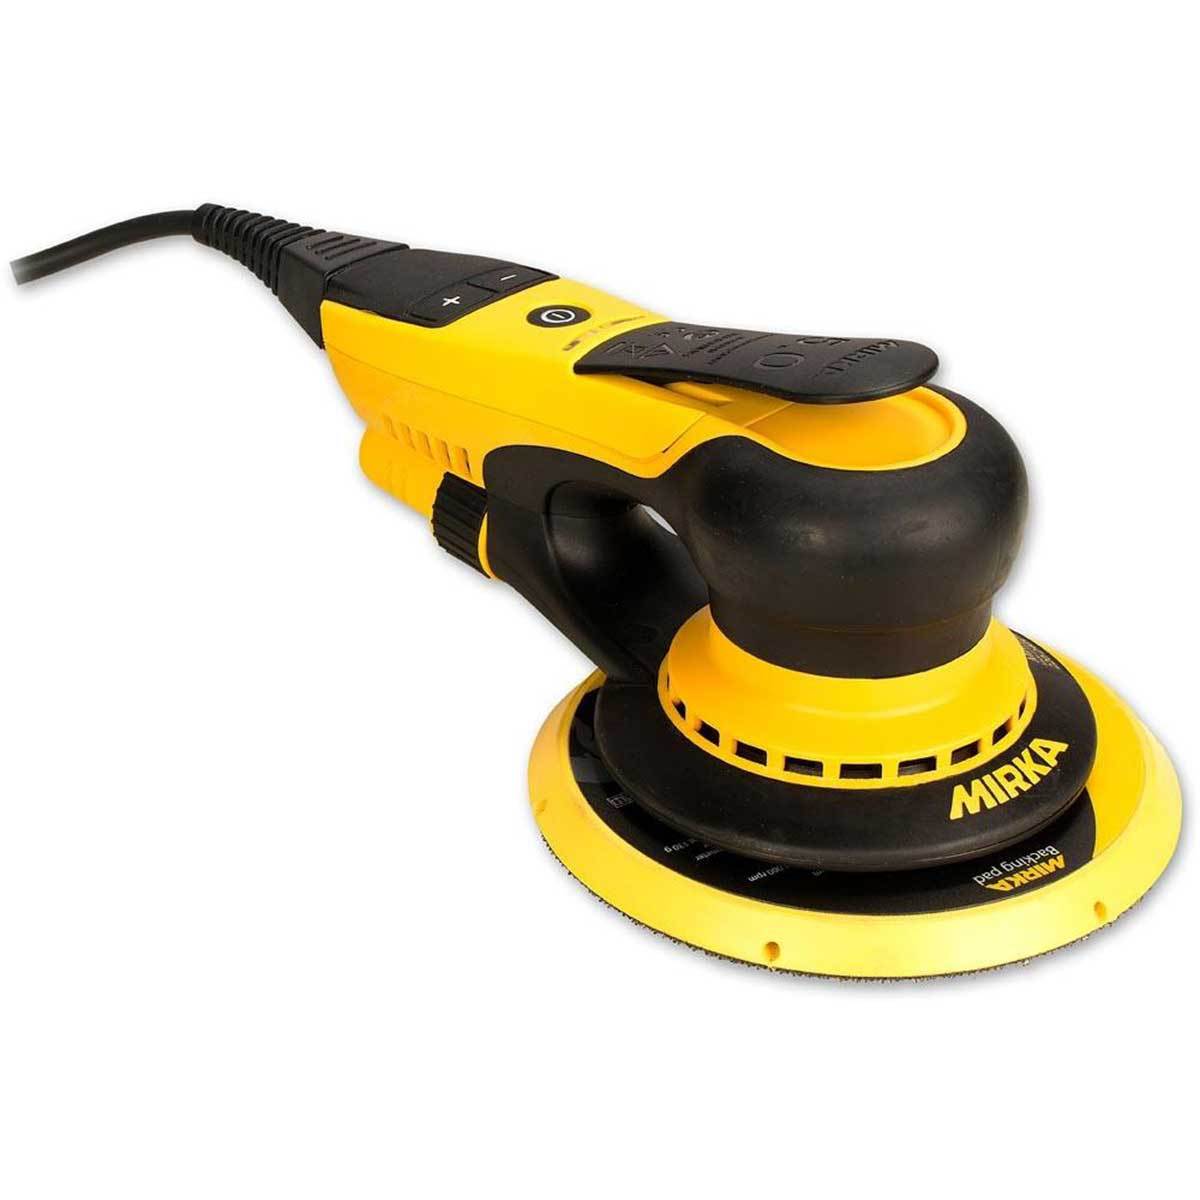 Mirka black/yellow DEROS sander has large 6" sanding pad, paddle switch, electronic speed controls, dust extraction port.